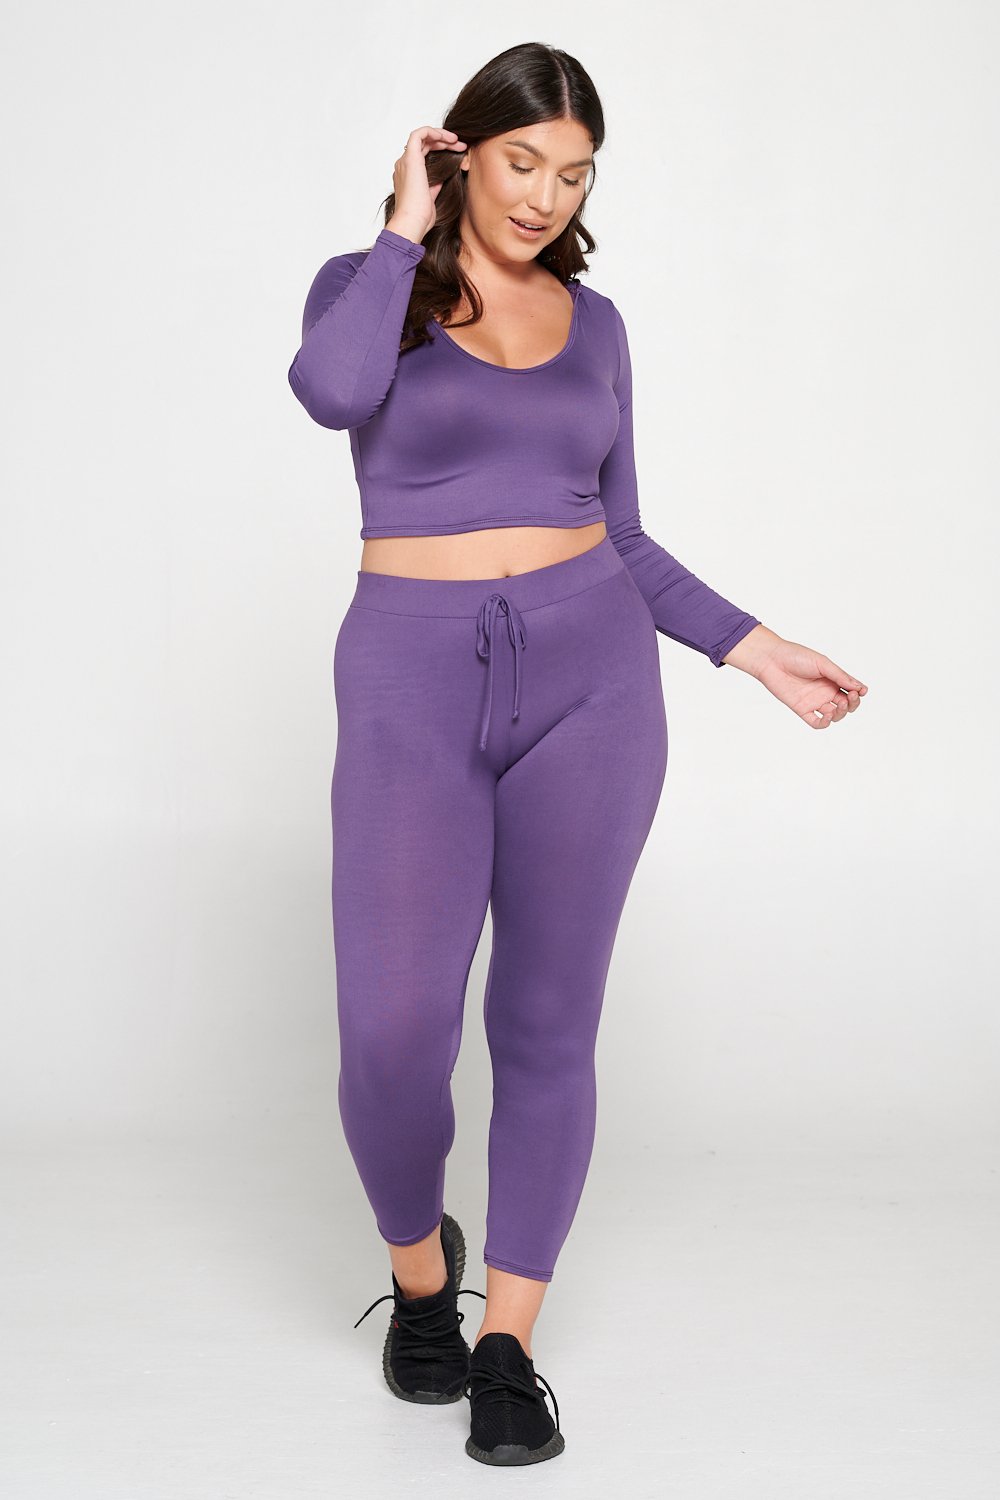 livd L I V D women's contemporary plus size  scoop neck crop hoodie and elastic band sweatpant with faux drawstring in dusty wine purple